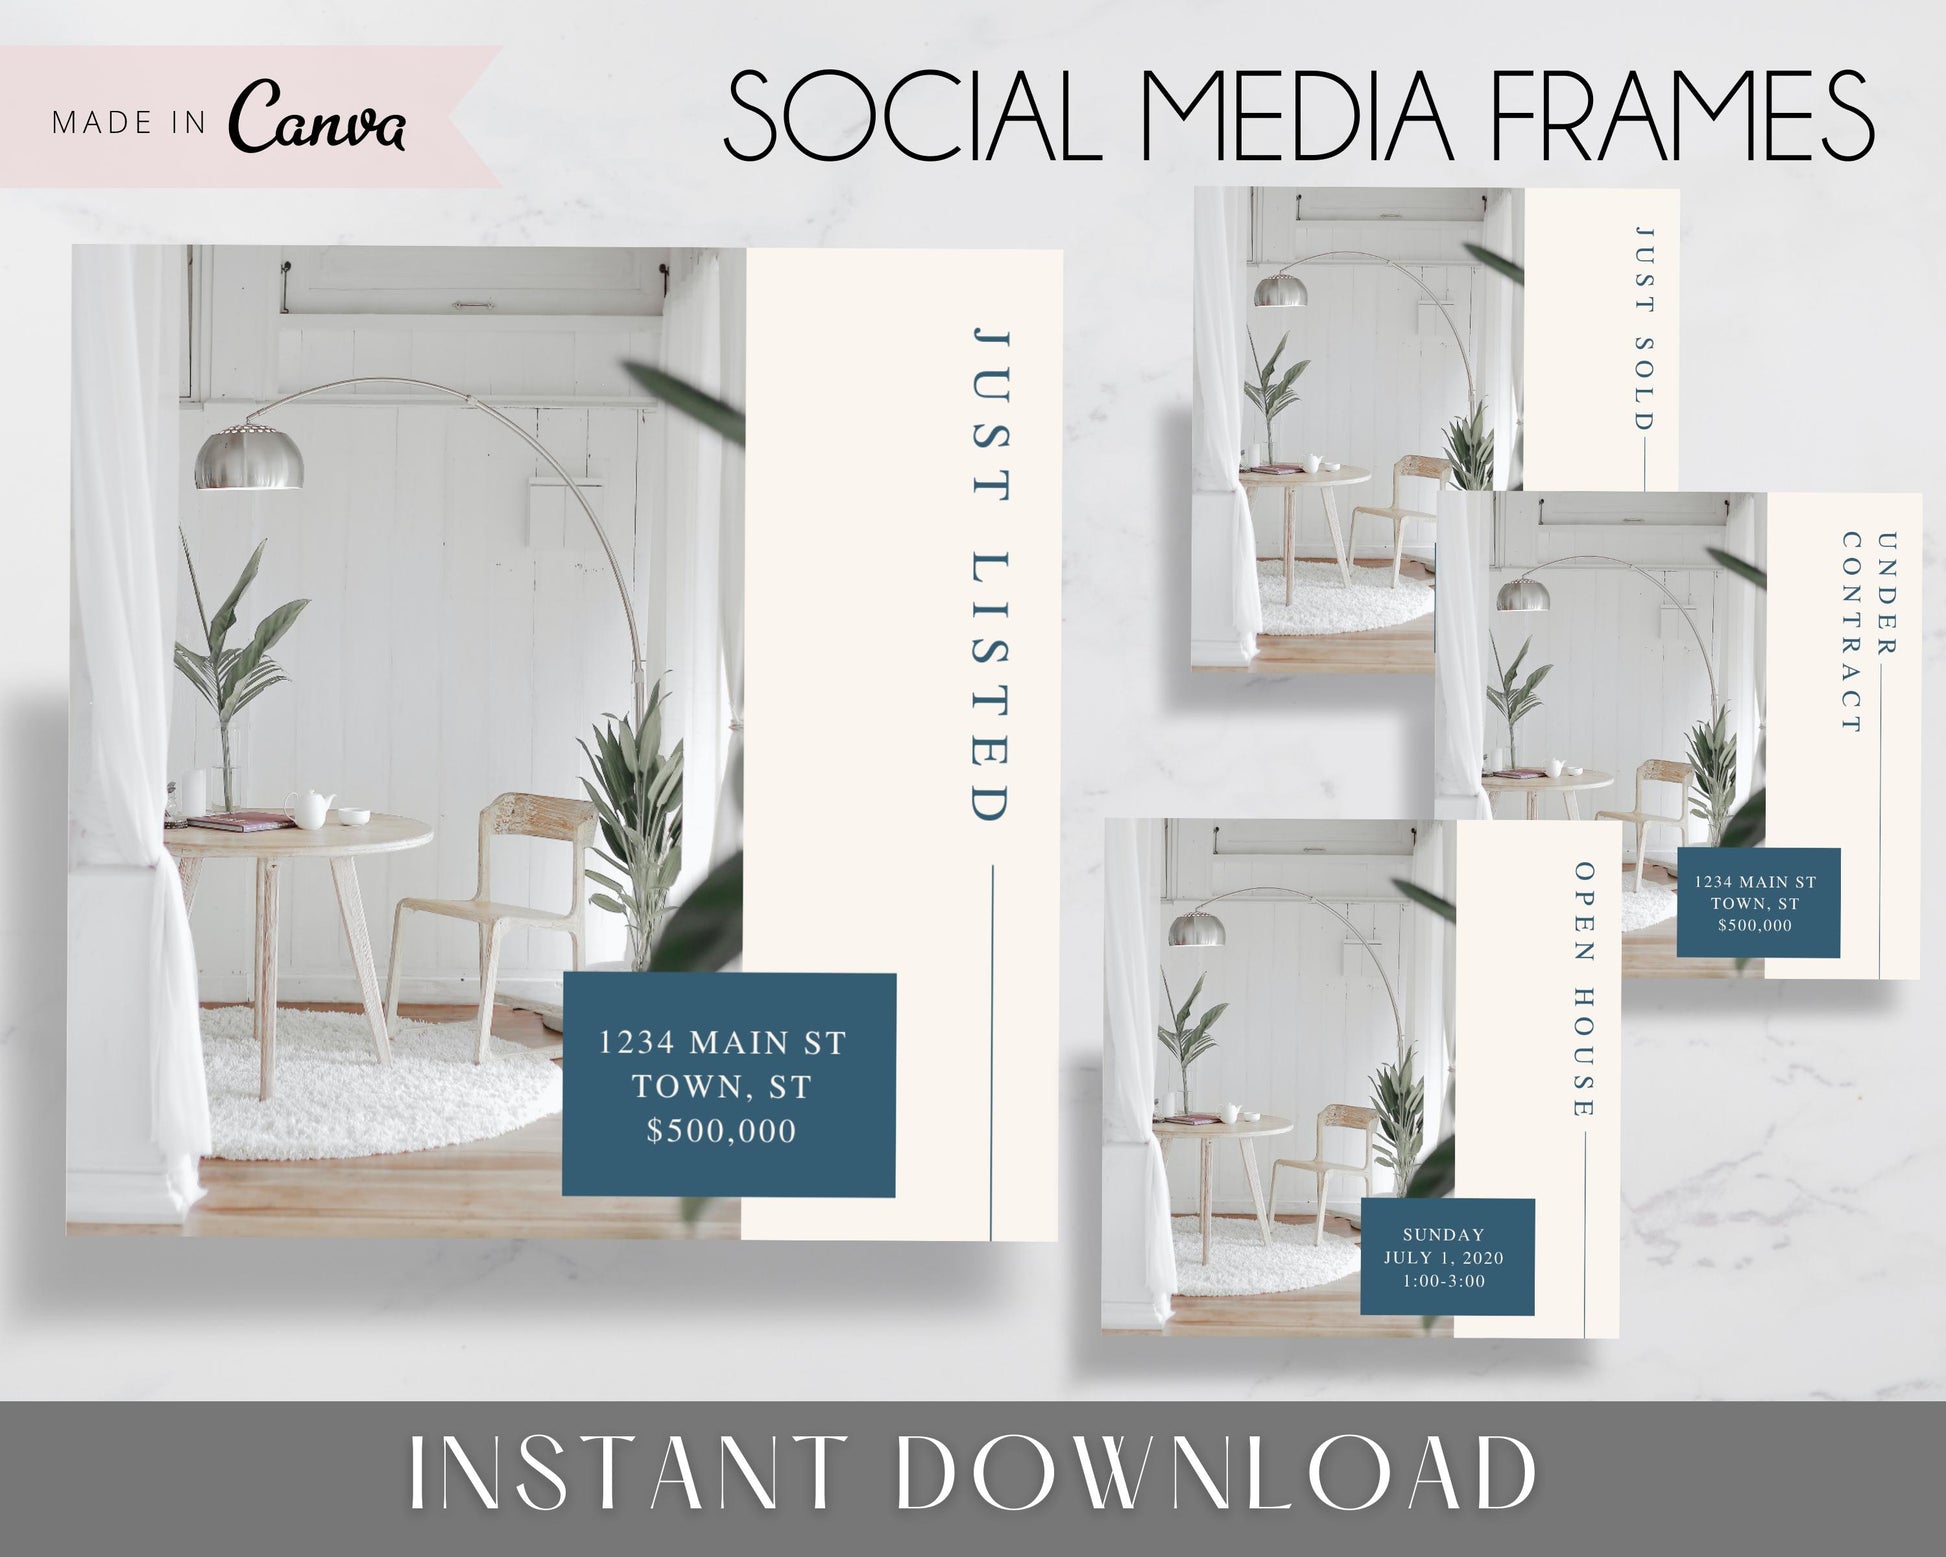 Real Estate Facebook and Instagram Frames - Just Listed , Sold, Open House, Under Contract Posts - Social Media Real Estate Marketing for Realtors, Agents - Instant Download